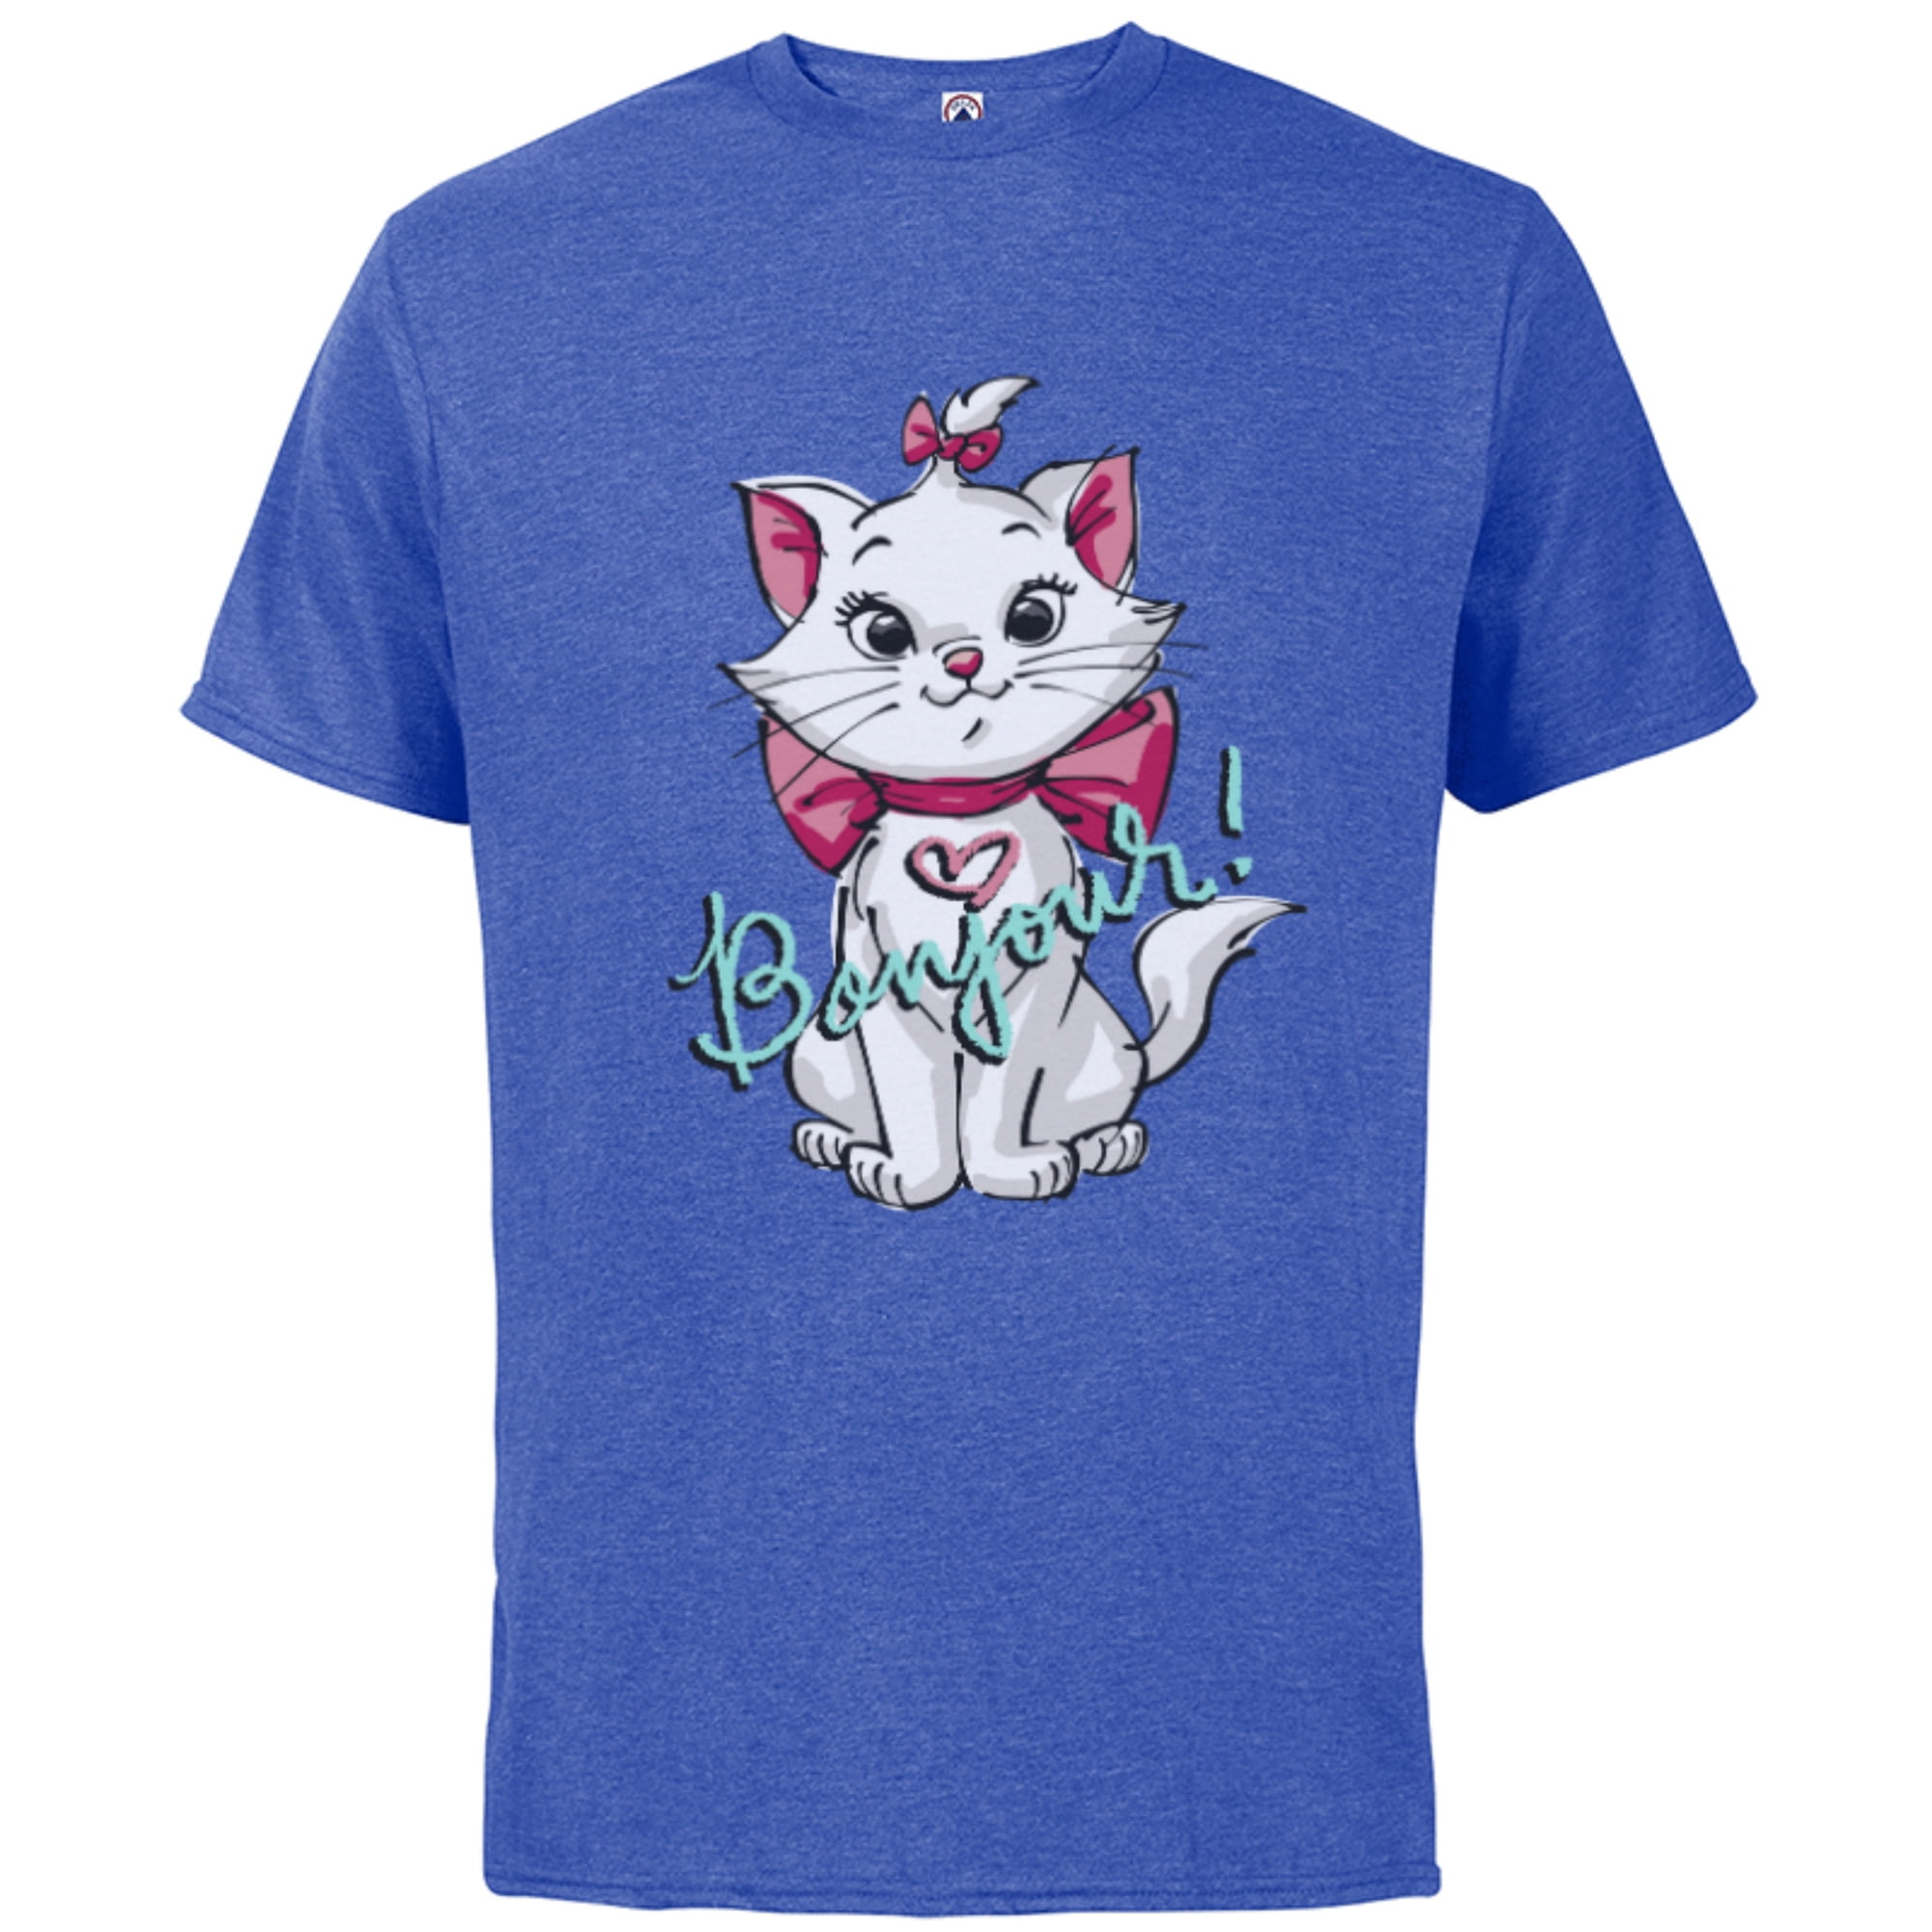 Disney Aristocats Marie Bonjour - Sleeve Short for Cotton Adults -Customized-White T-Shirt